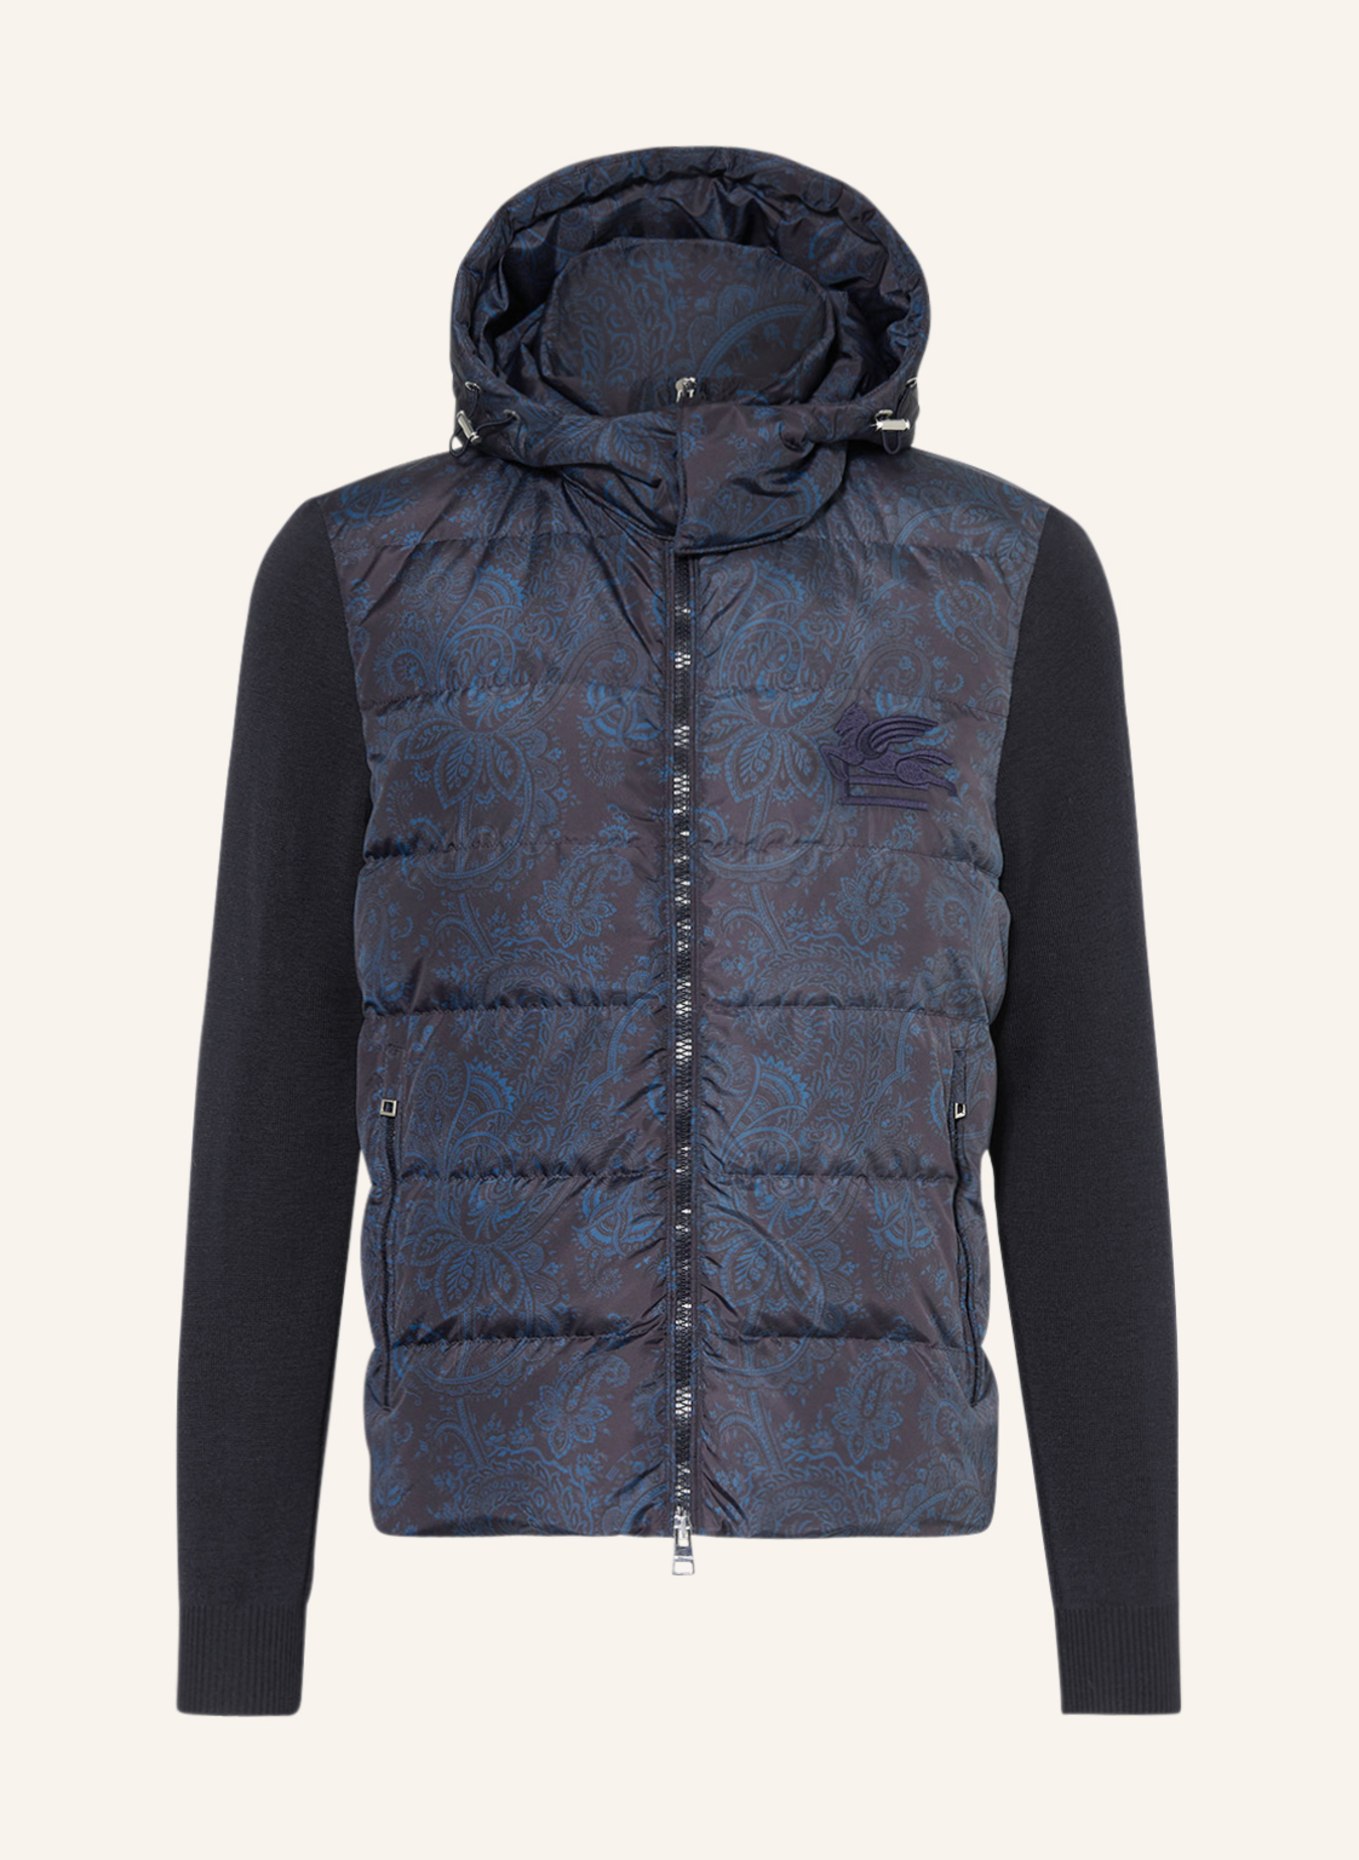 ETRO Quilted jacket in mixed materials with detachable hood, Color: DARK BLUE/ LIGHT BLUE/ GRAY (Image 1)